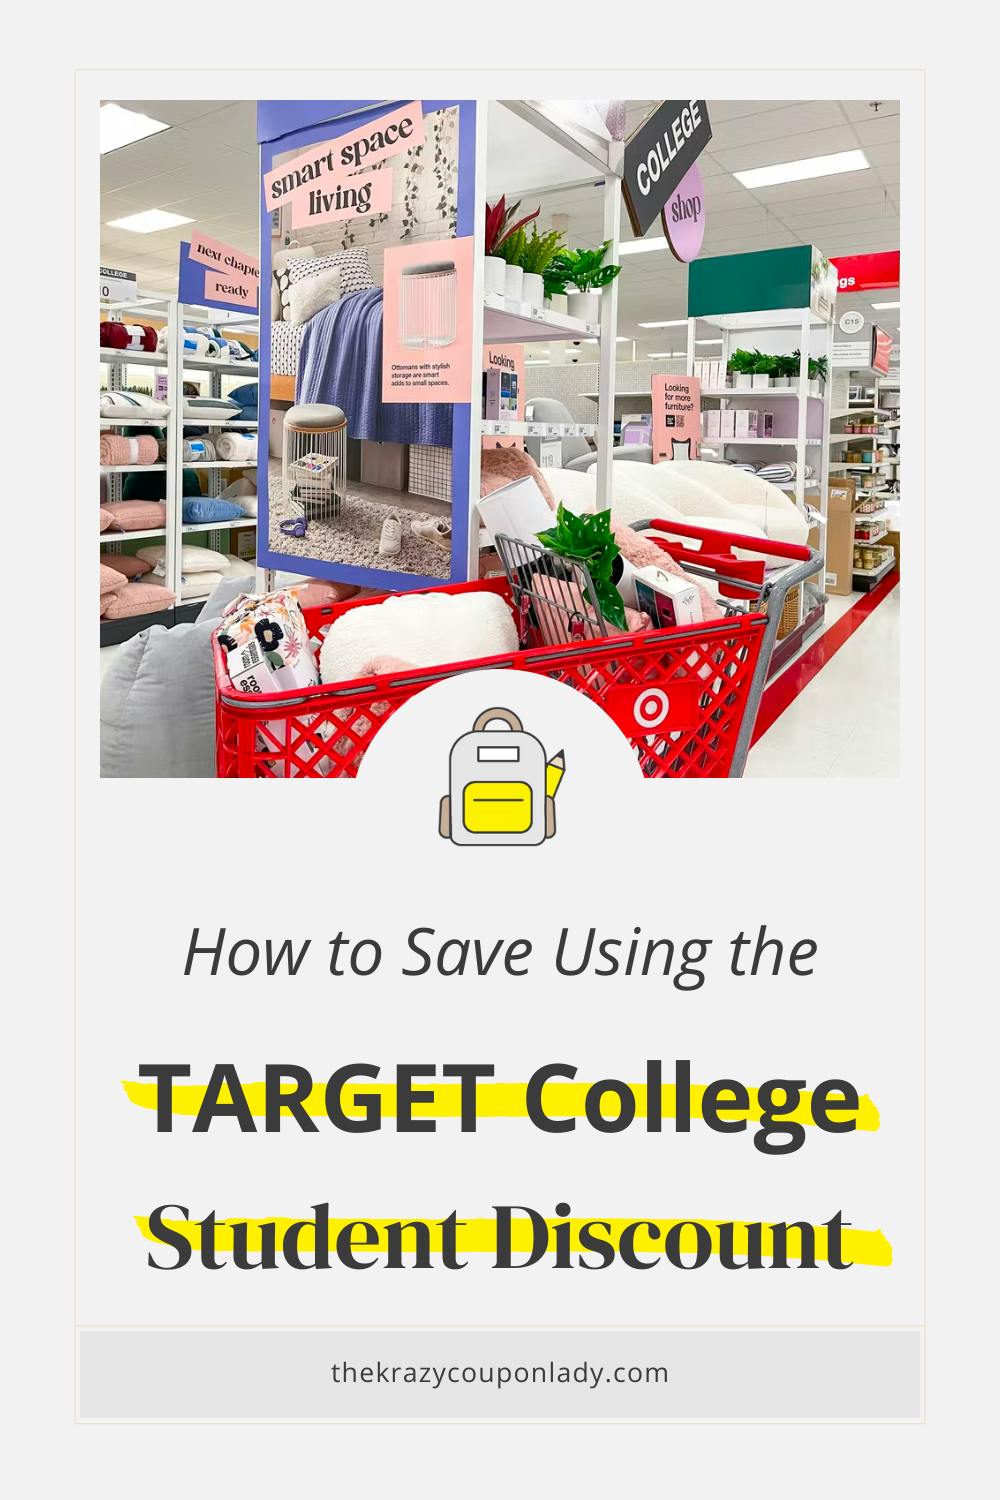 Target College Student Discount Get 20 Off The Krazy Coupon Lady